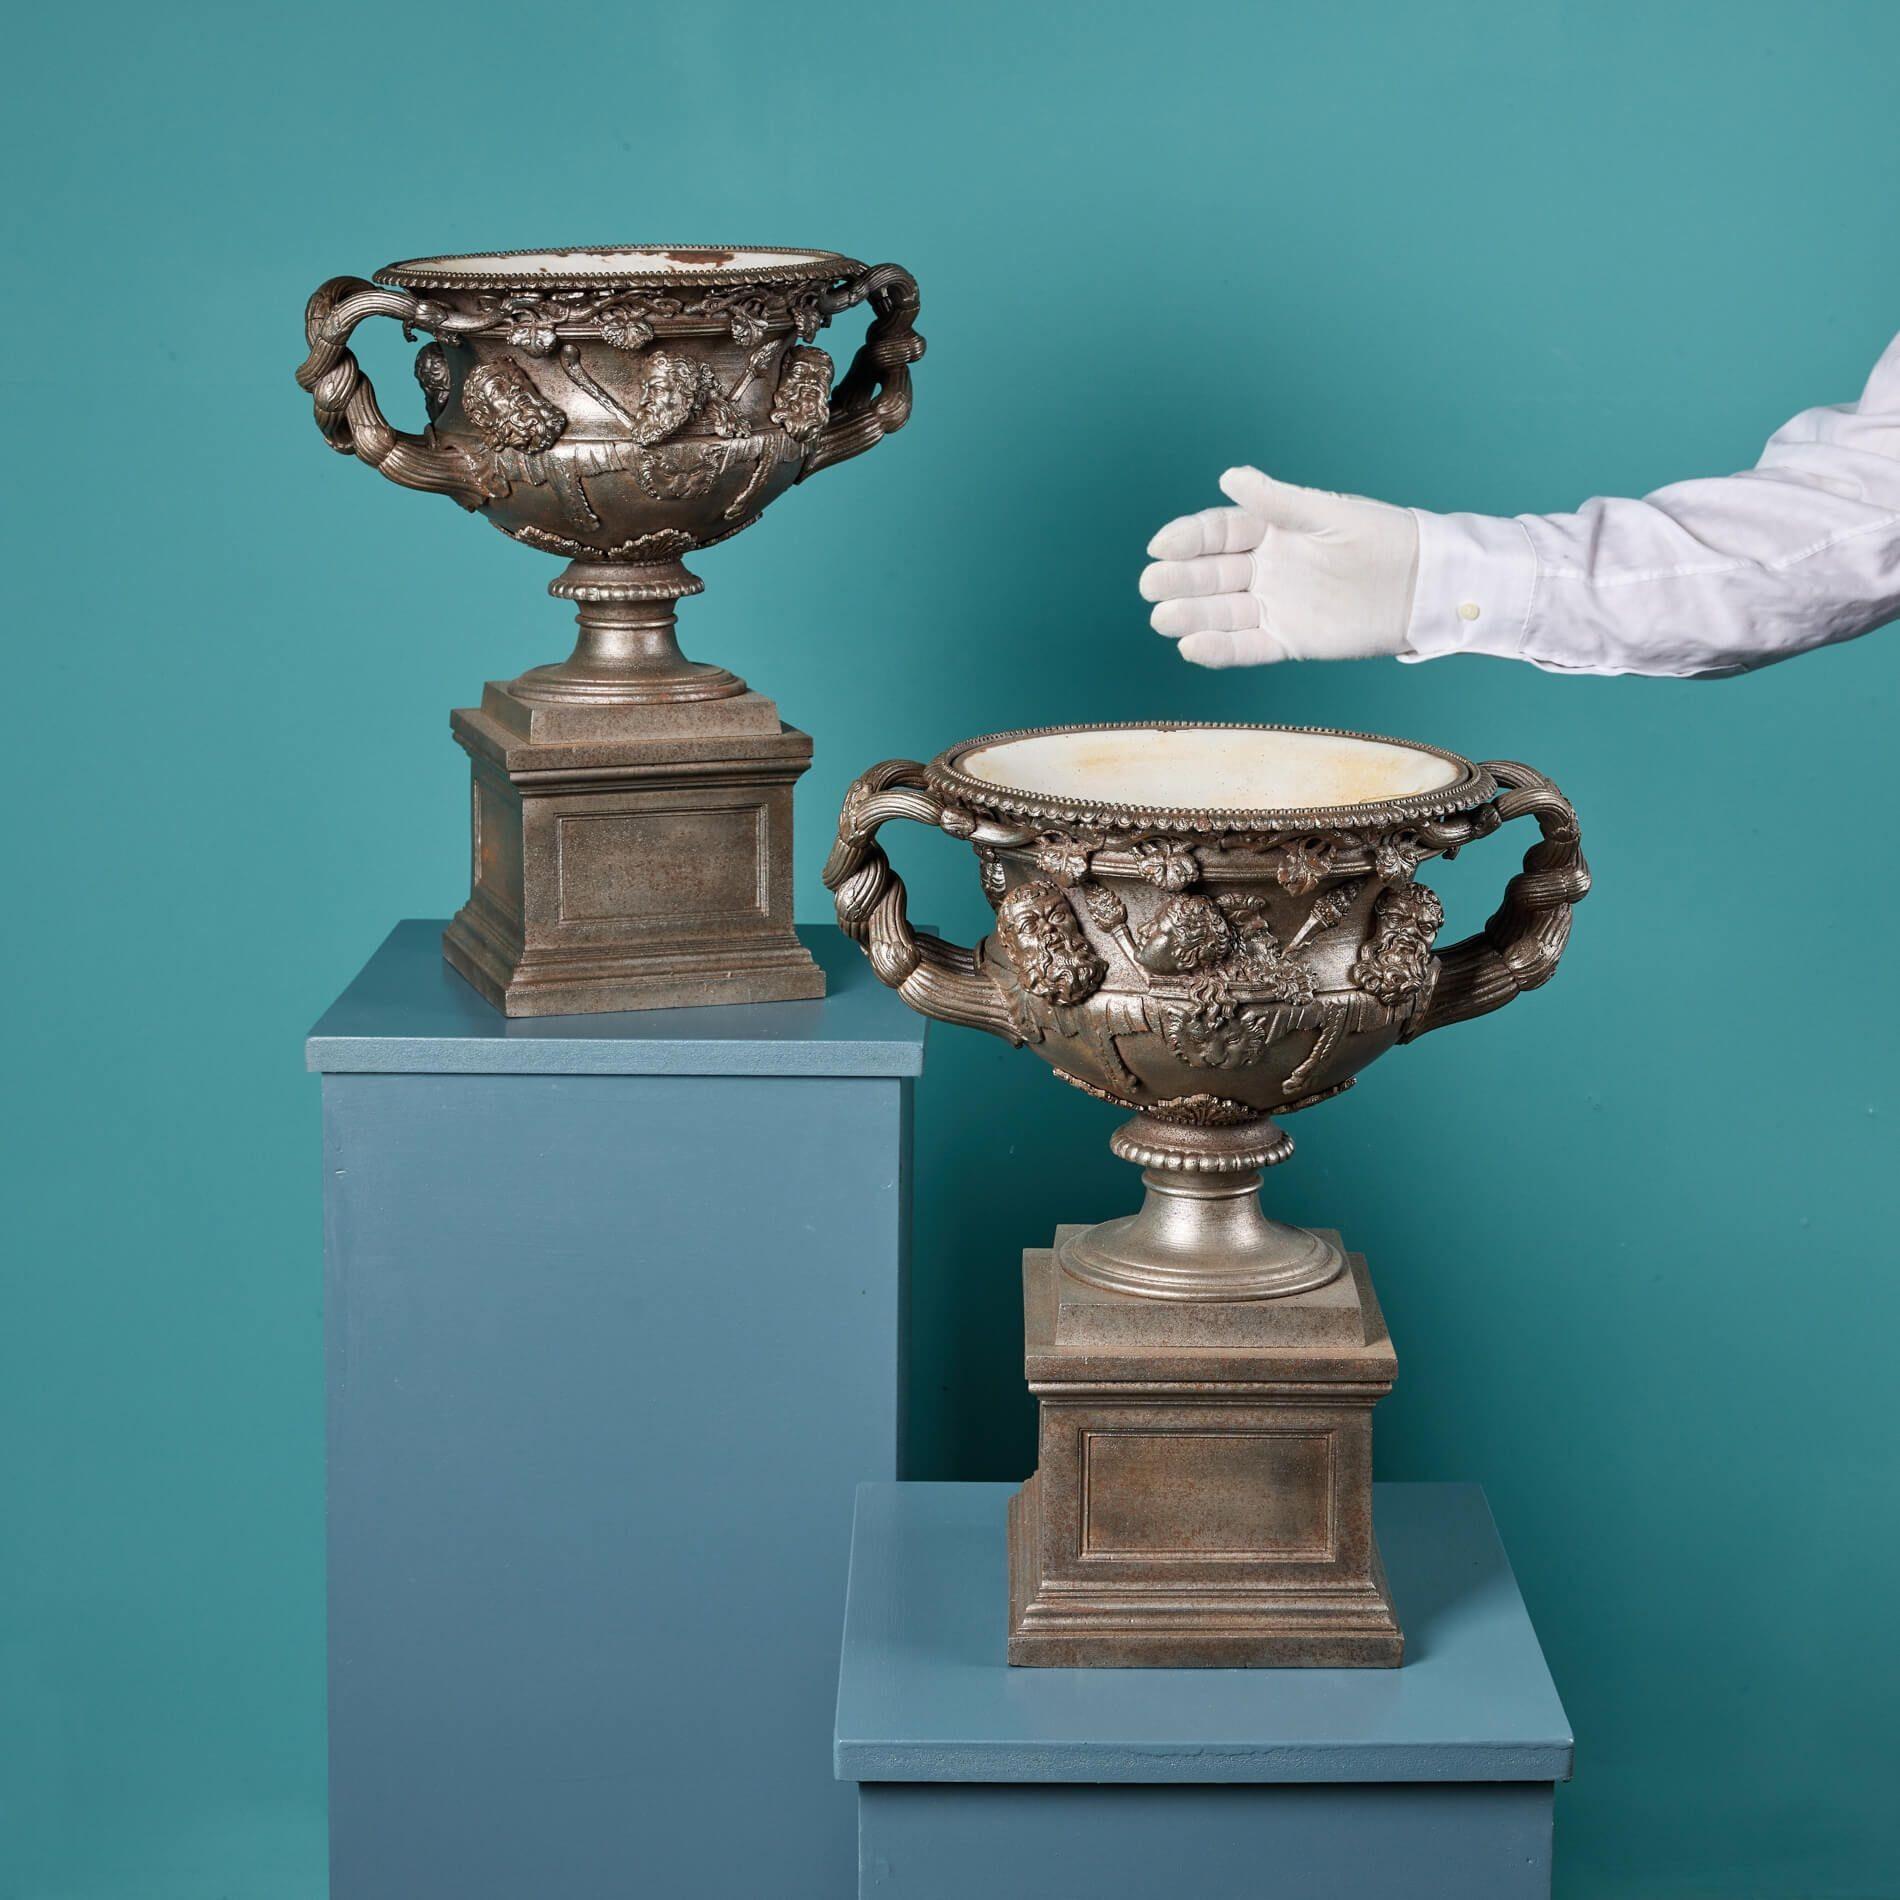 A very finely cast pair of cast iron models of the renowned Warwick Vase circa 1870. While the original Warwick Vase is a colossal 6ft high, these replicas are scale at just 40cm tall, bringing prestige to an interior placed on a console, column or